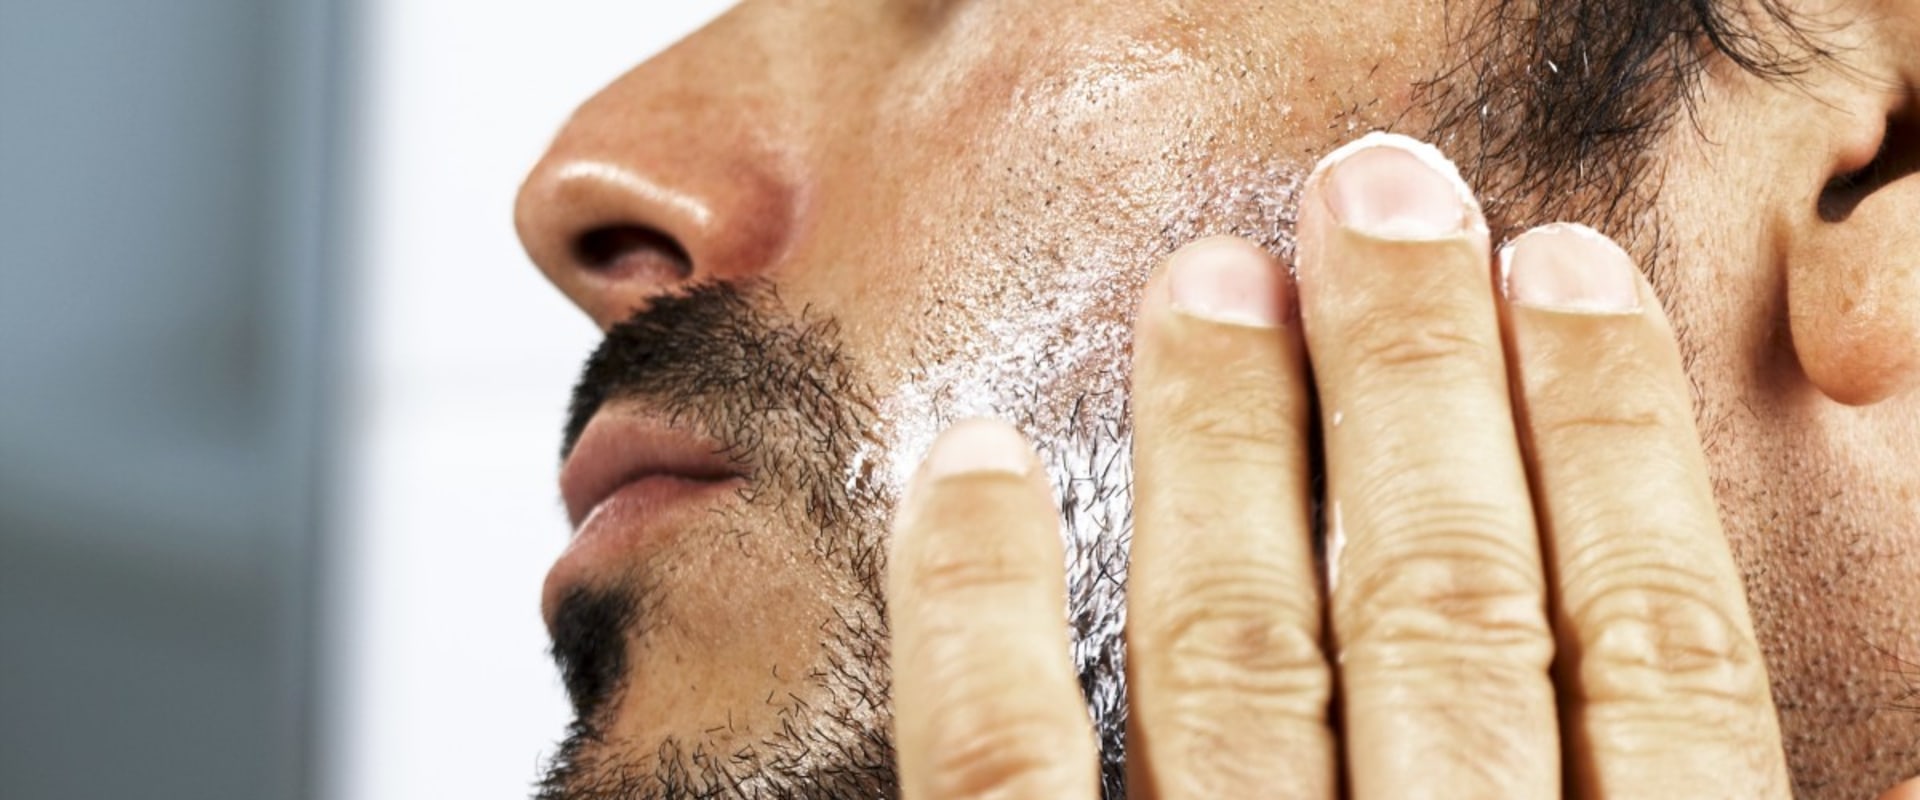 The Ultimate Guide to Preventing and Treating Ingrown Hairs for Men